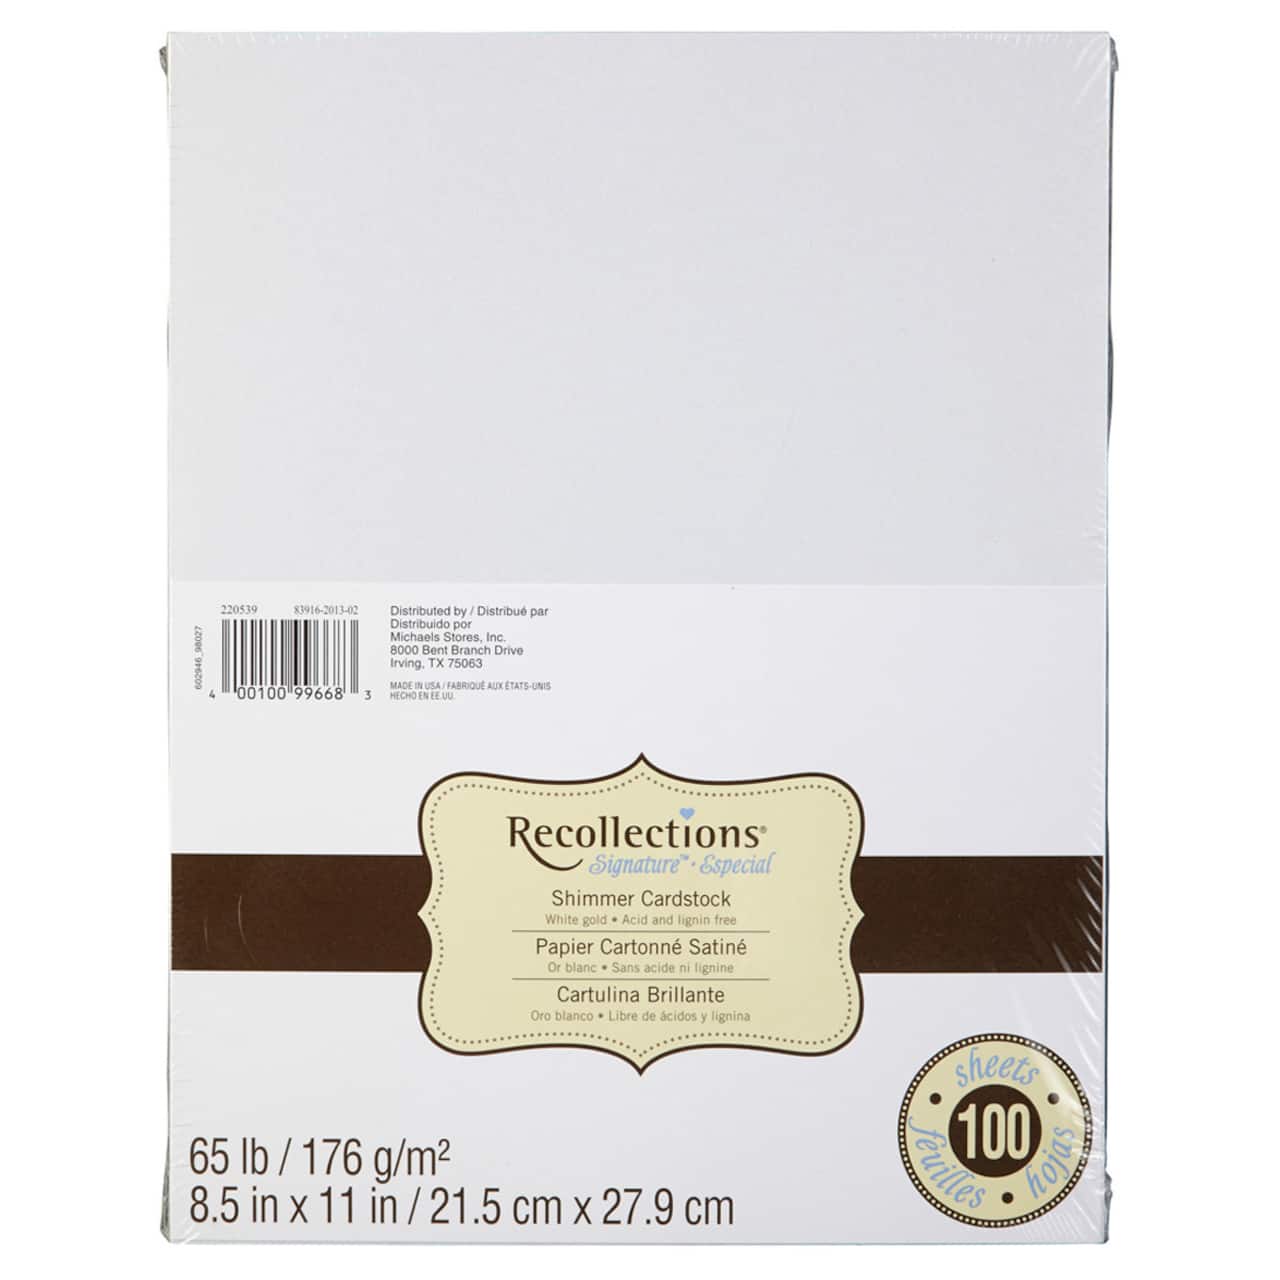 White Gold 8.5 x 11 Shimmer Cardstock Paper by Recollections